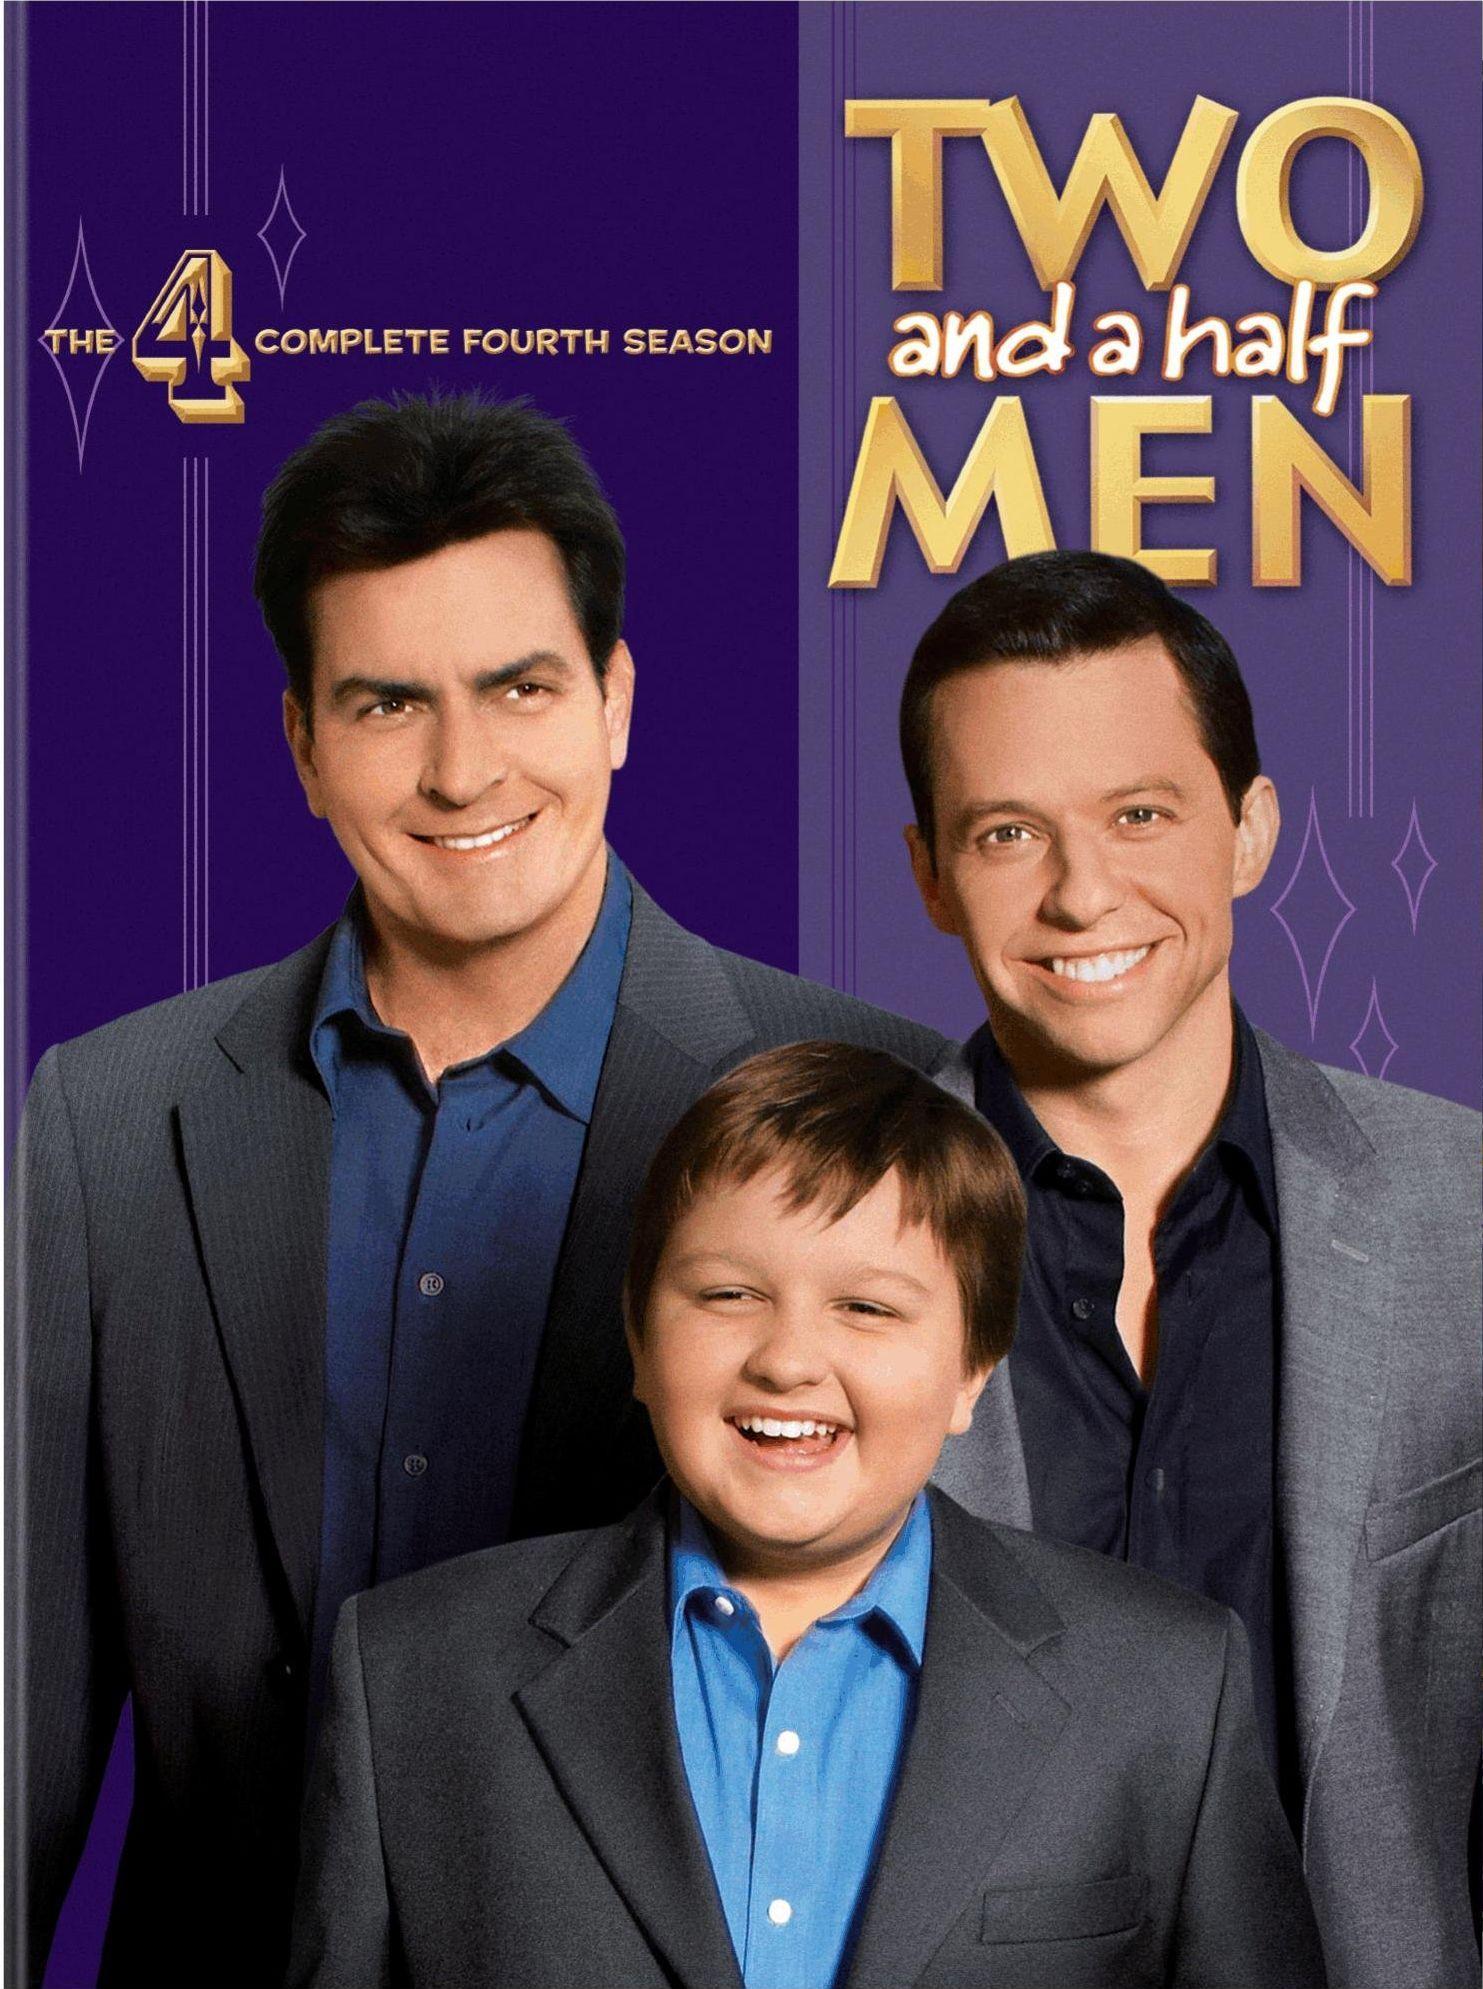 1483x1989px Two And A Half Men 378.83 KB.